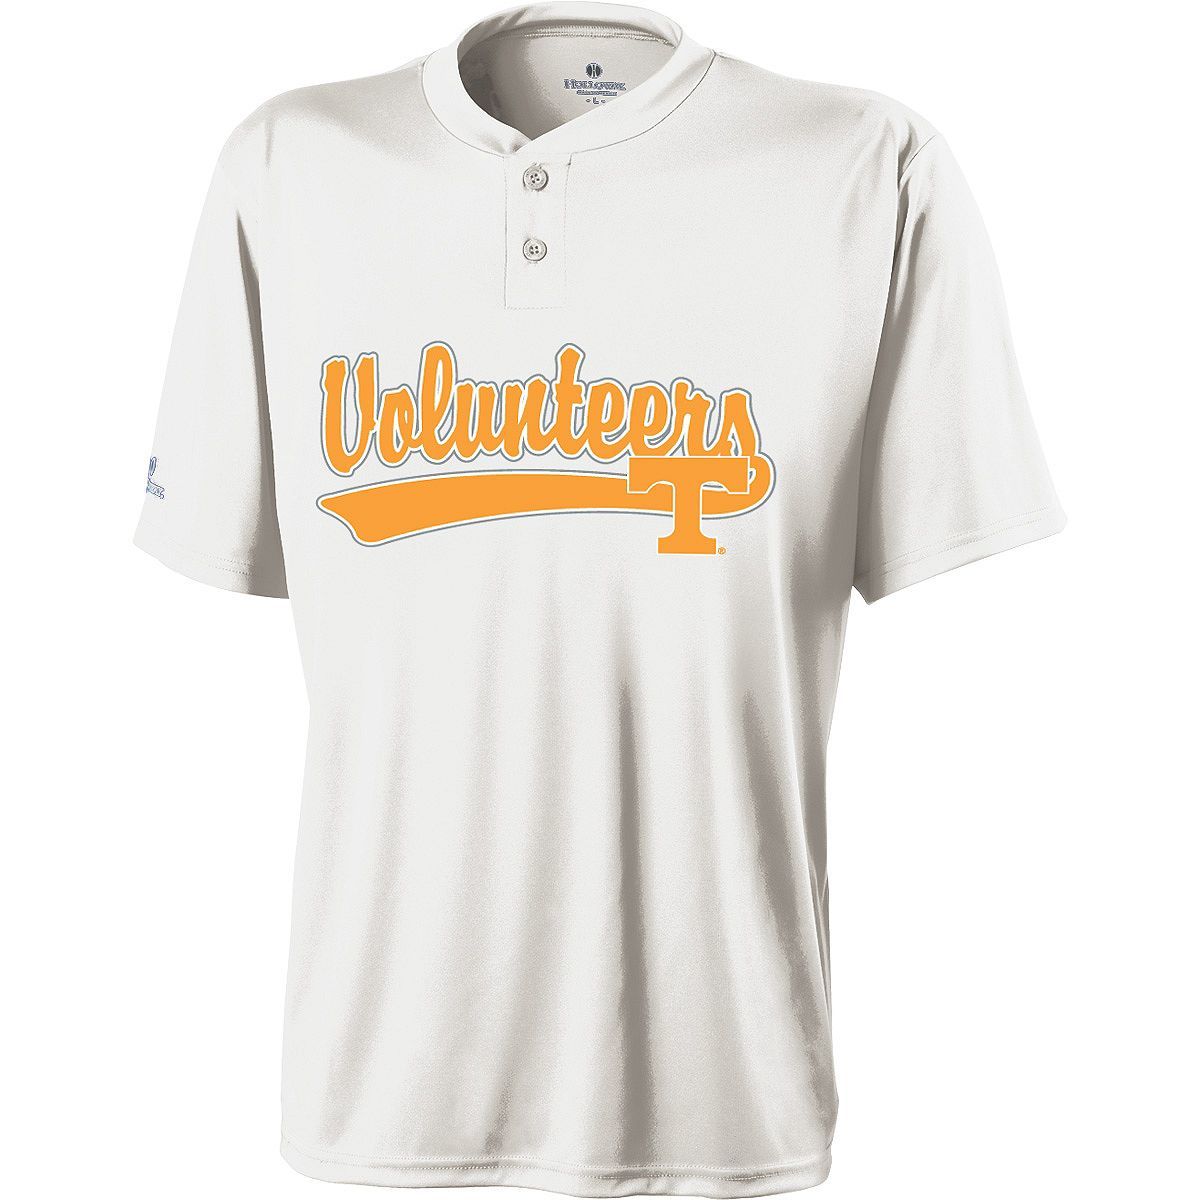 Holloway Cyr Adult Ball Park Jersey in Tennessee  -Part of the Adult, Adult-Jersey, Holloway, Shirts product lines at KanaleyCreations.com